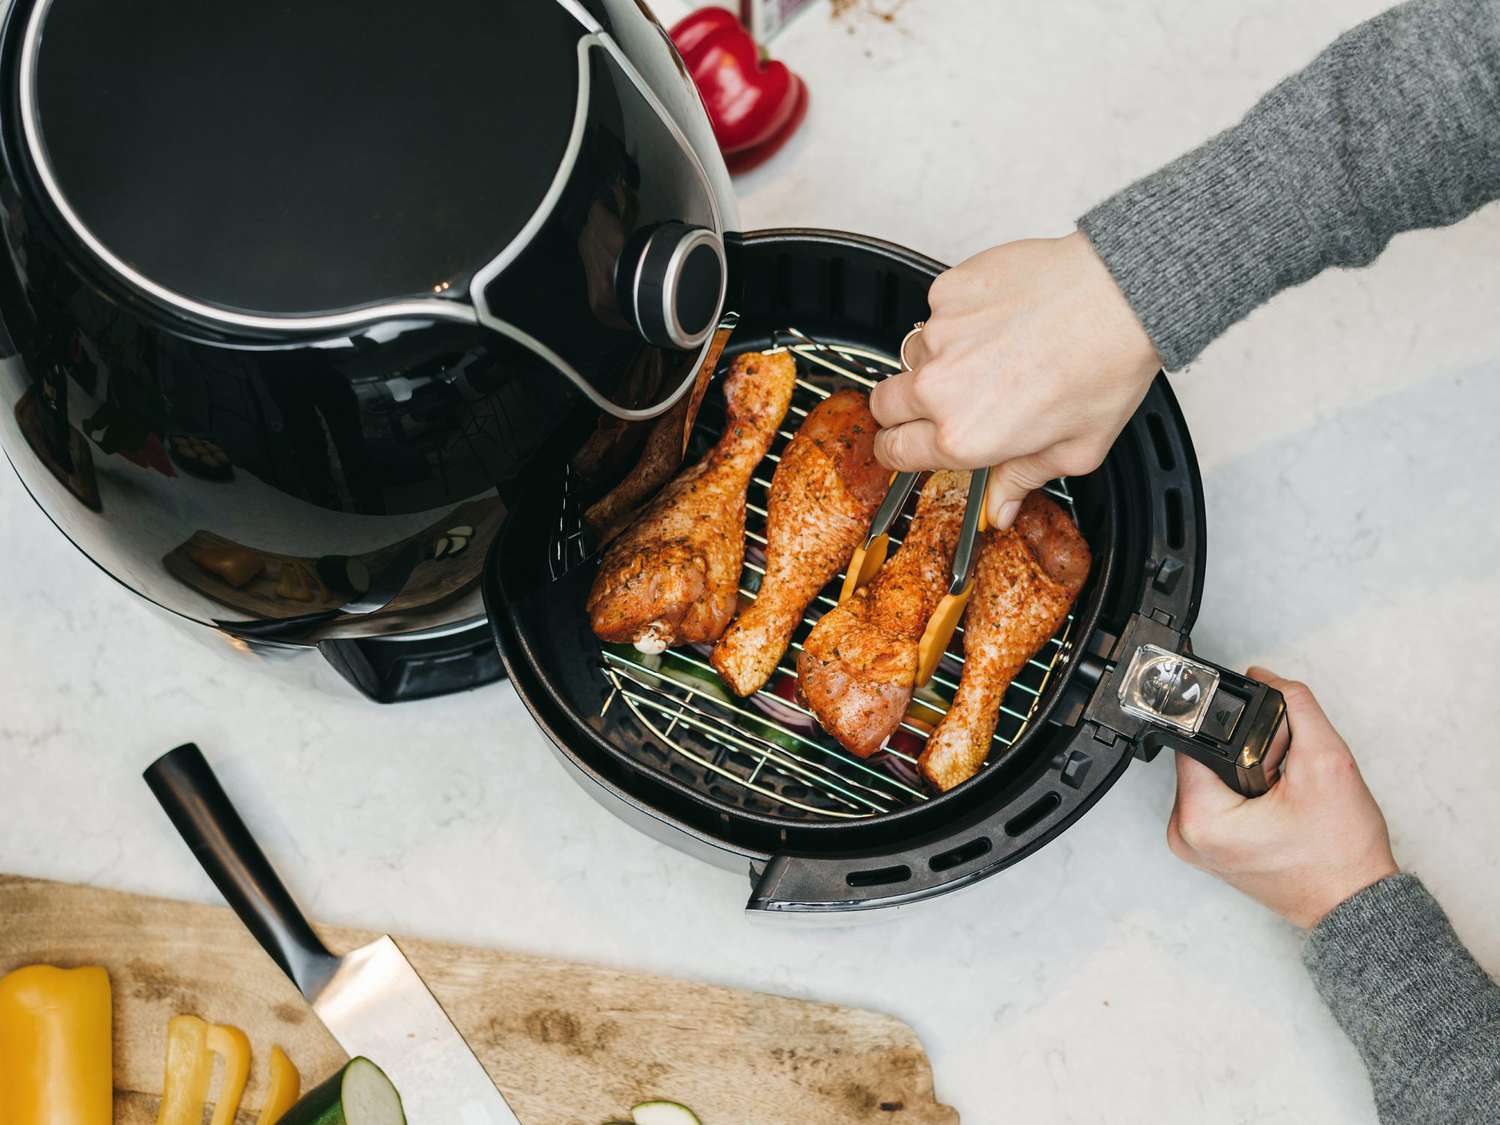 How To Clean An Air Fryer To Remove Baked-On Food And Grease